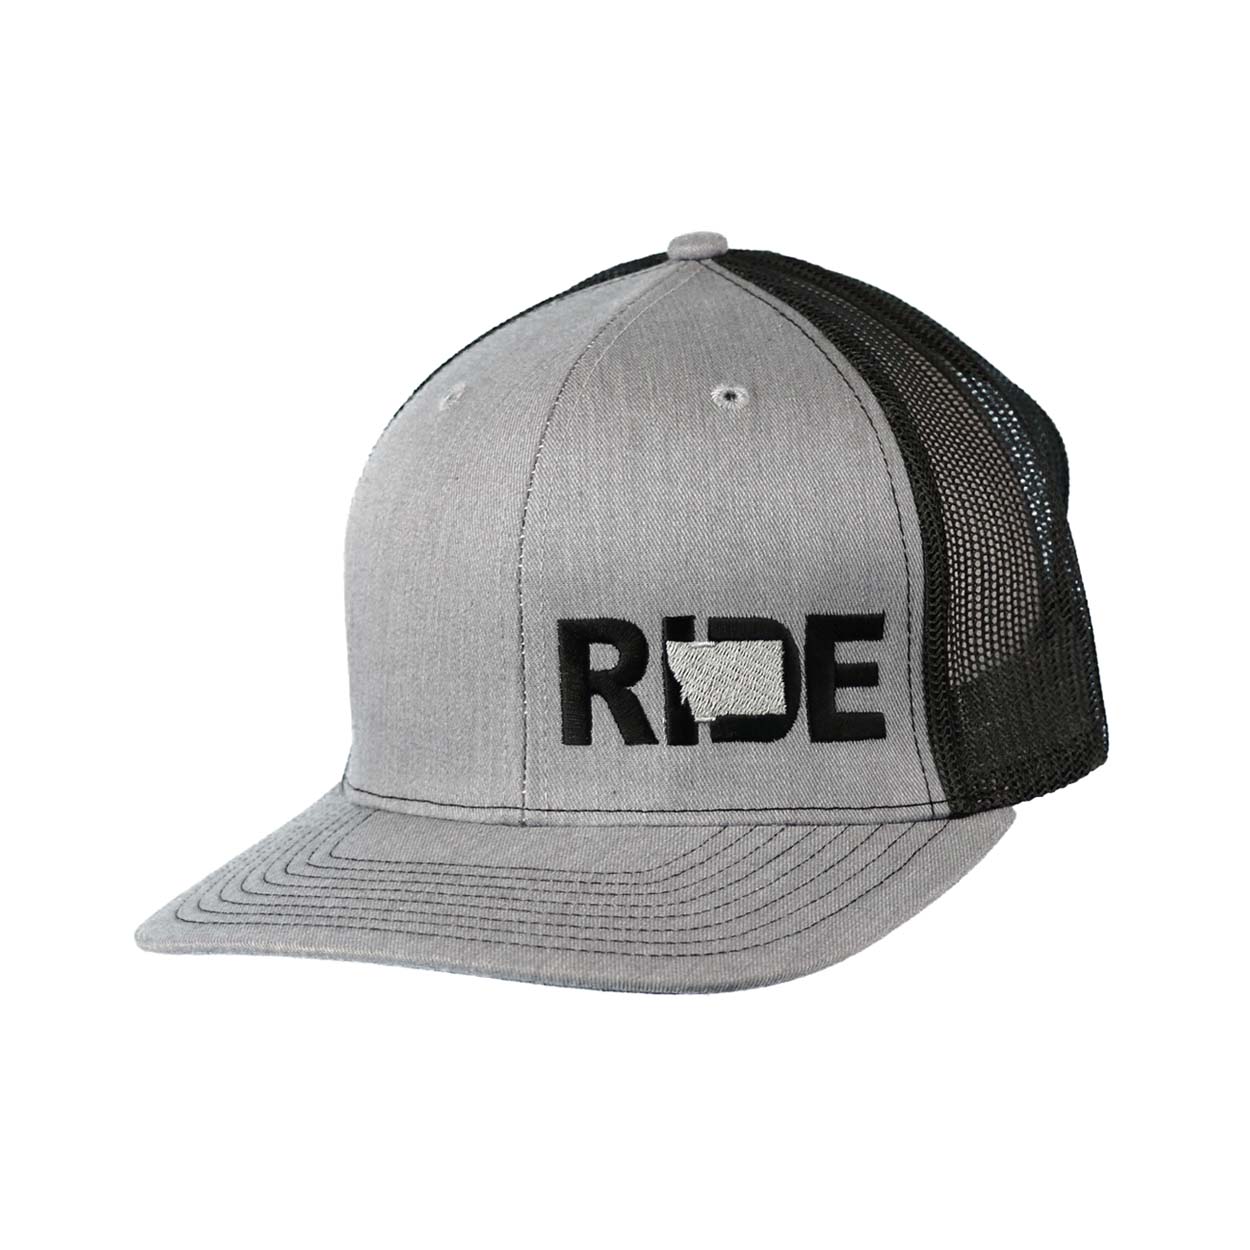 Ride Montana Classic Pro Night Out Embroidered Snapback Trucker Hat Heather Gray/Black